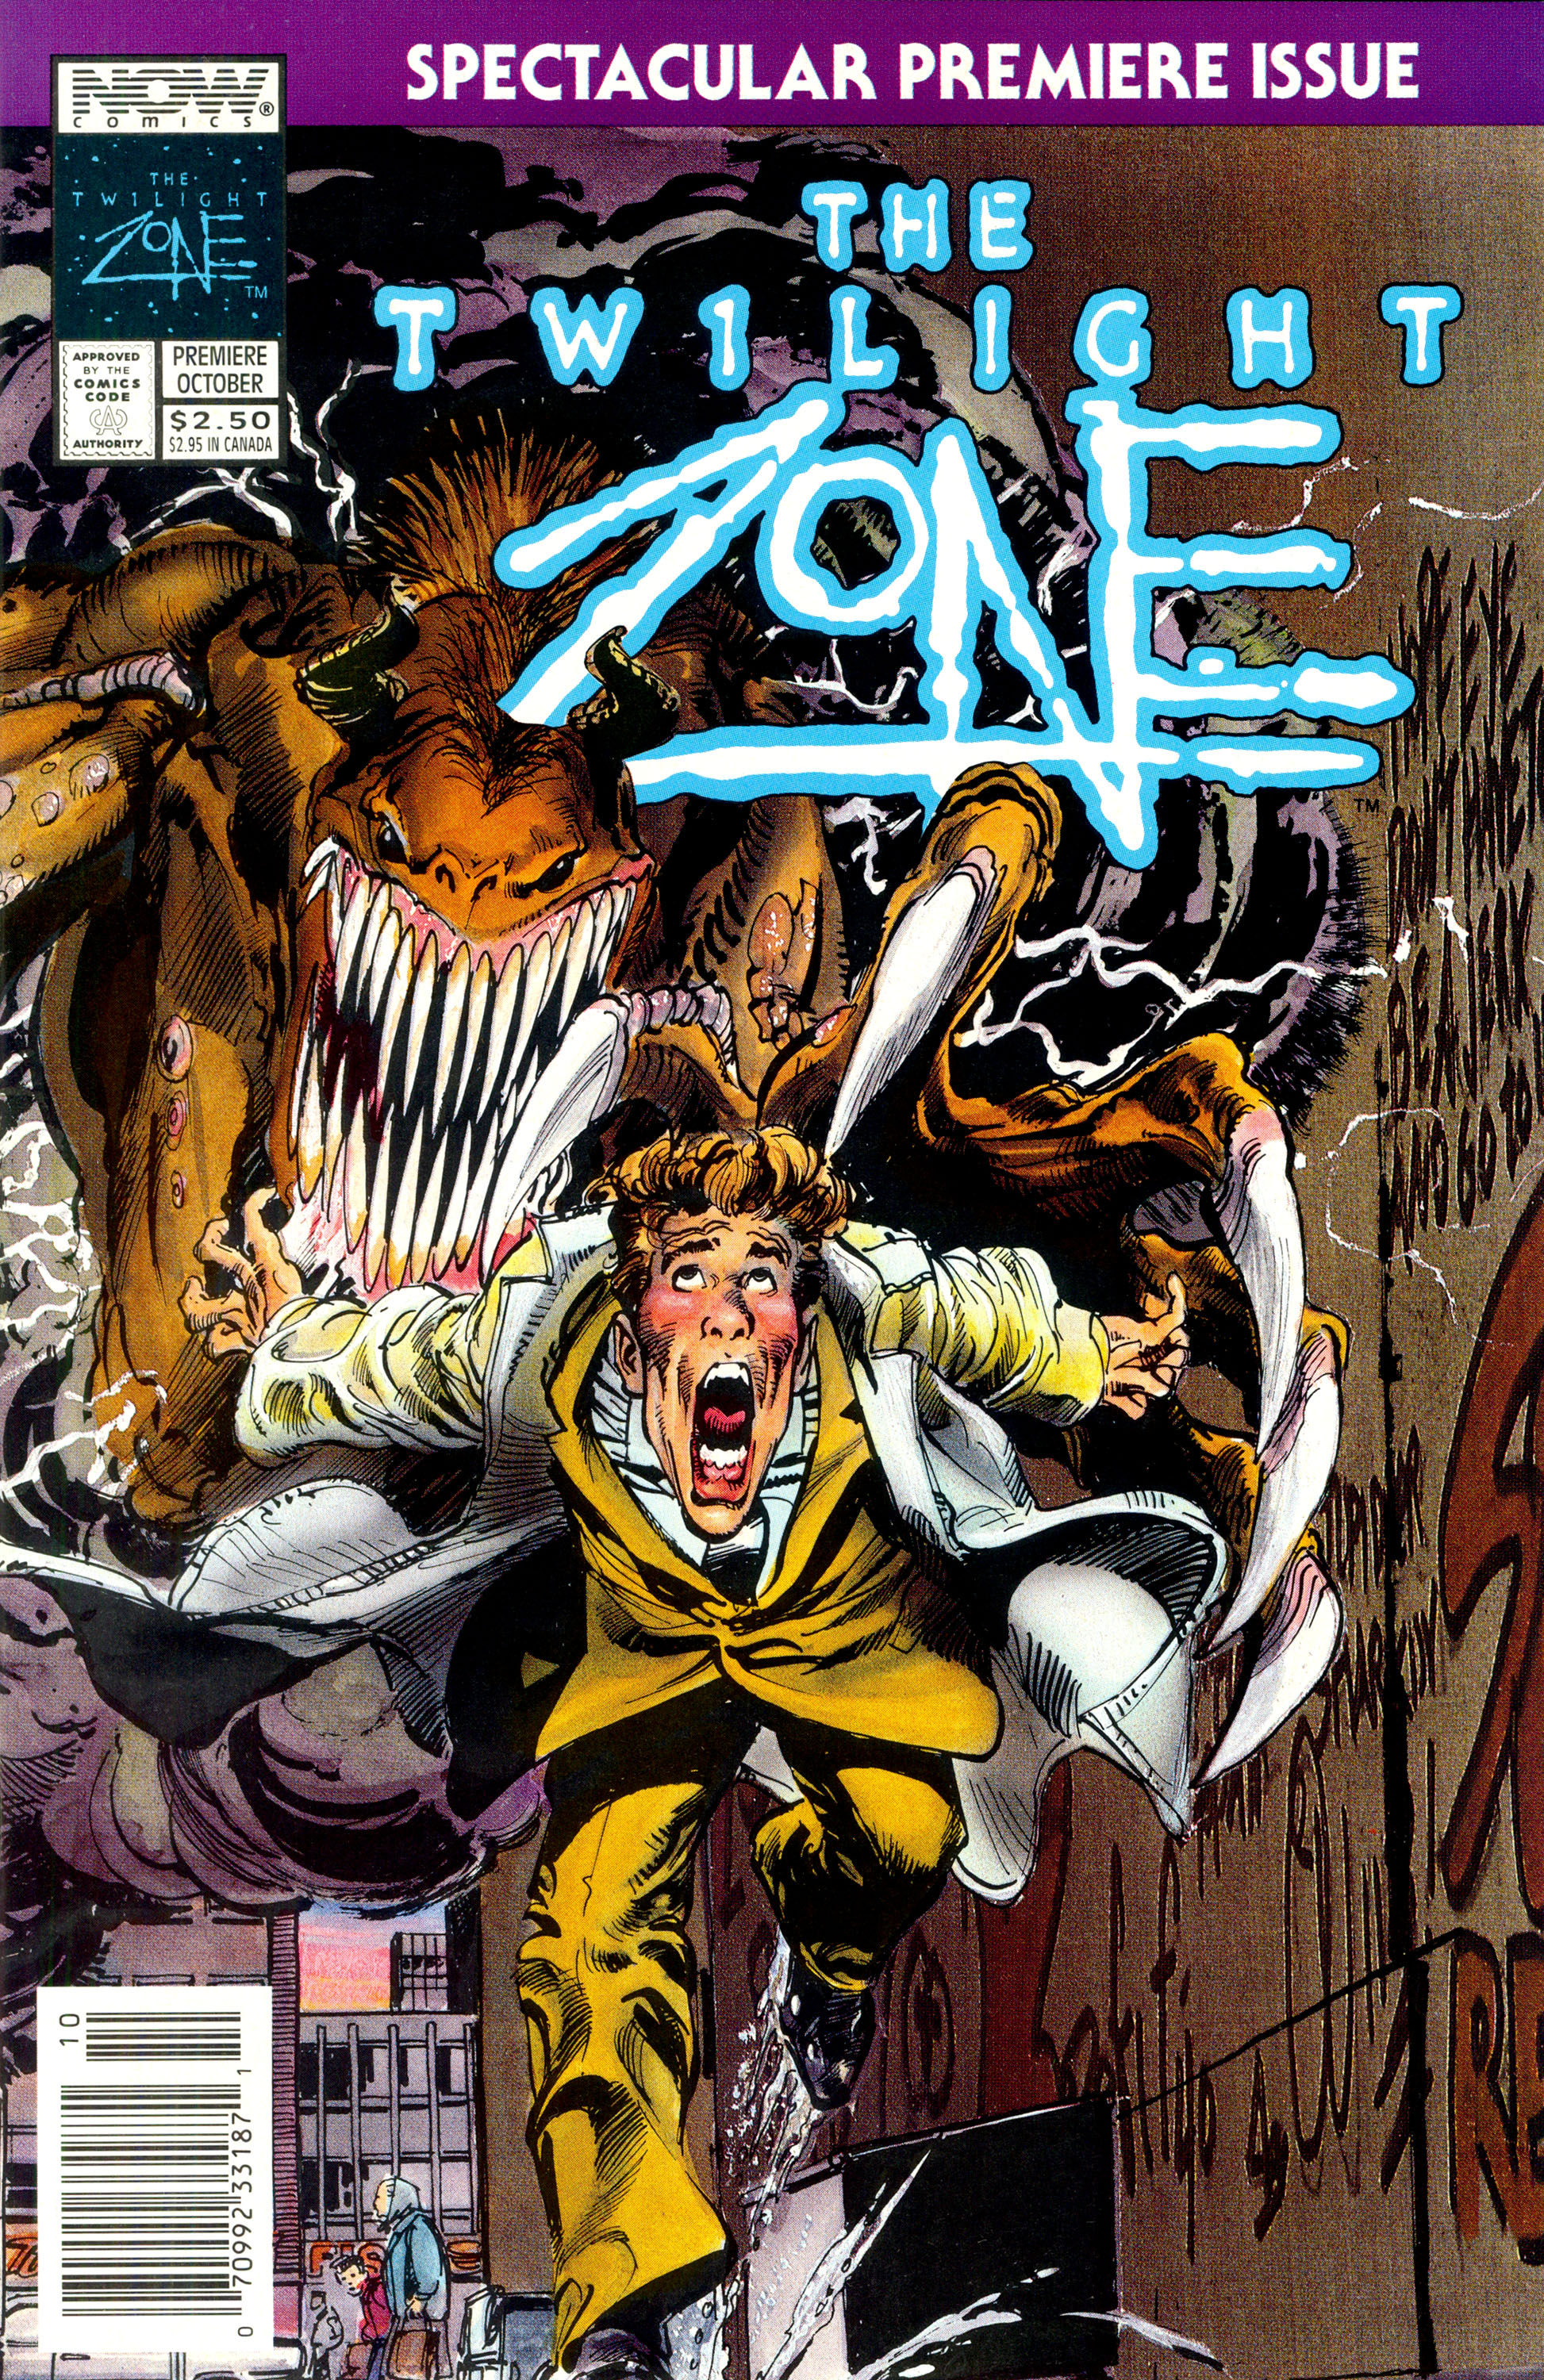 Twilight Zone #1, cover, art by Neal Adams